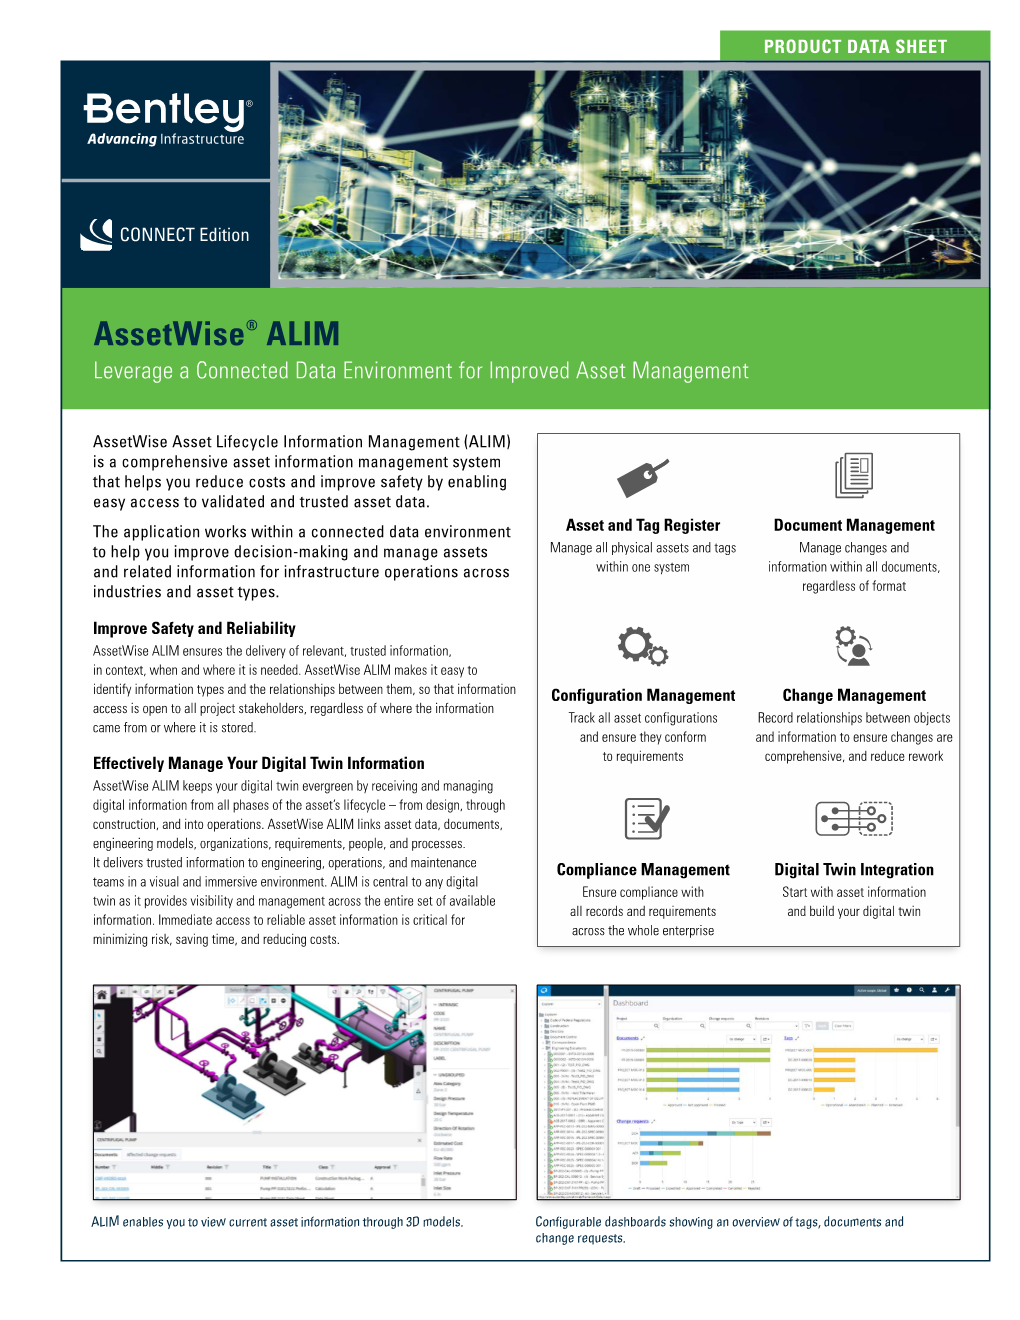 Assetwise® ALIM Leverage a Connected Data Environment for Improved Asset Management